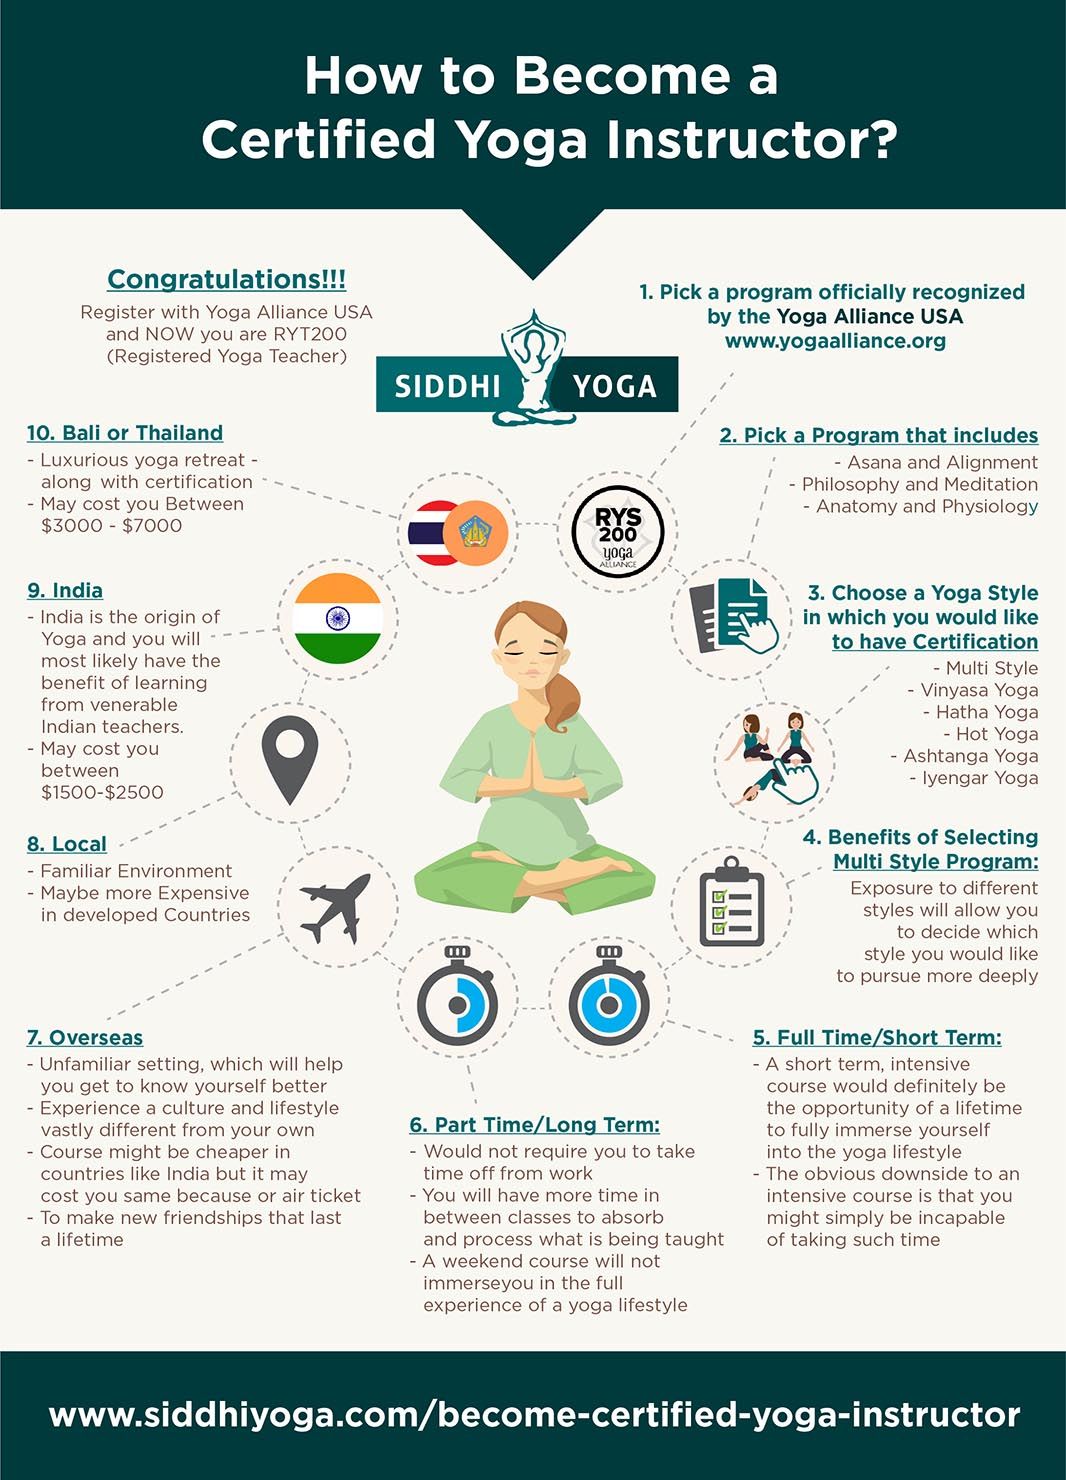 How to Become a Yoga Teacher in Canada (Step-by-Step Guide and